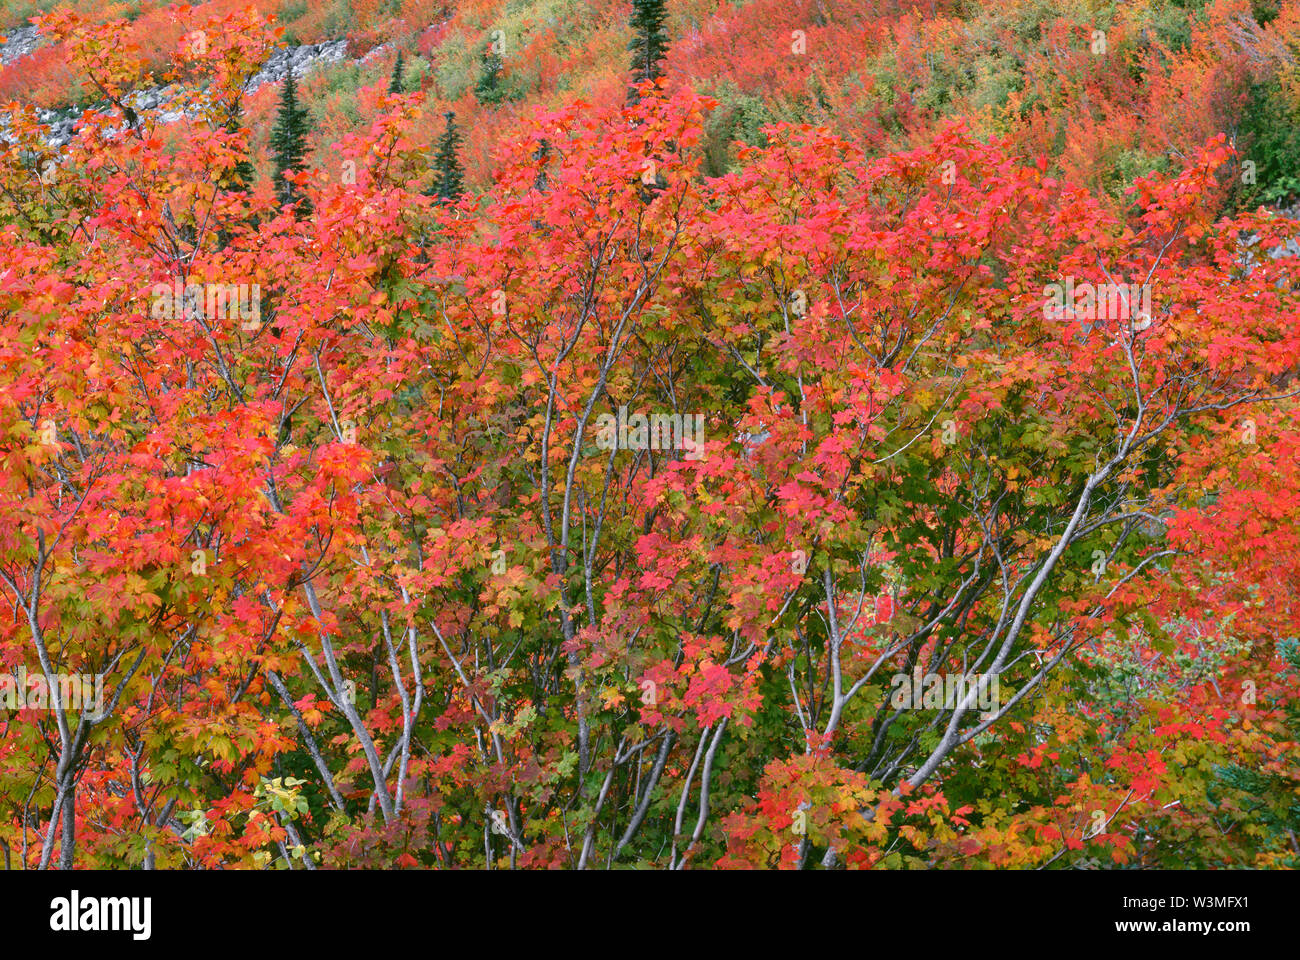 USA, Washington, Mt. Rainier National Park, Fall colored vine maple (Acer circinatum) and scattered conifers in Stevens Canyon. Stock Photo